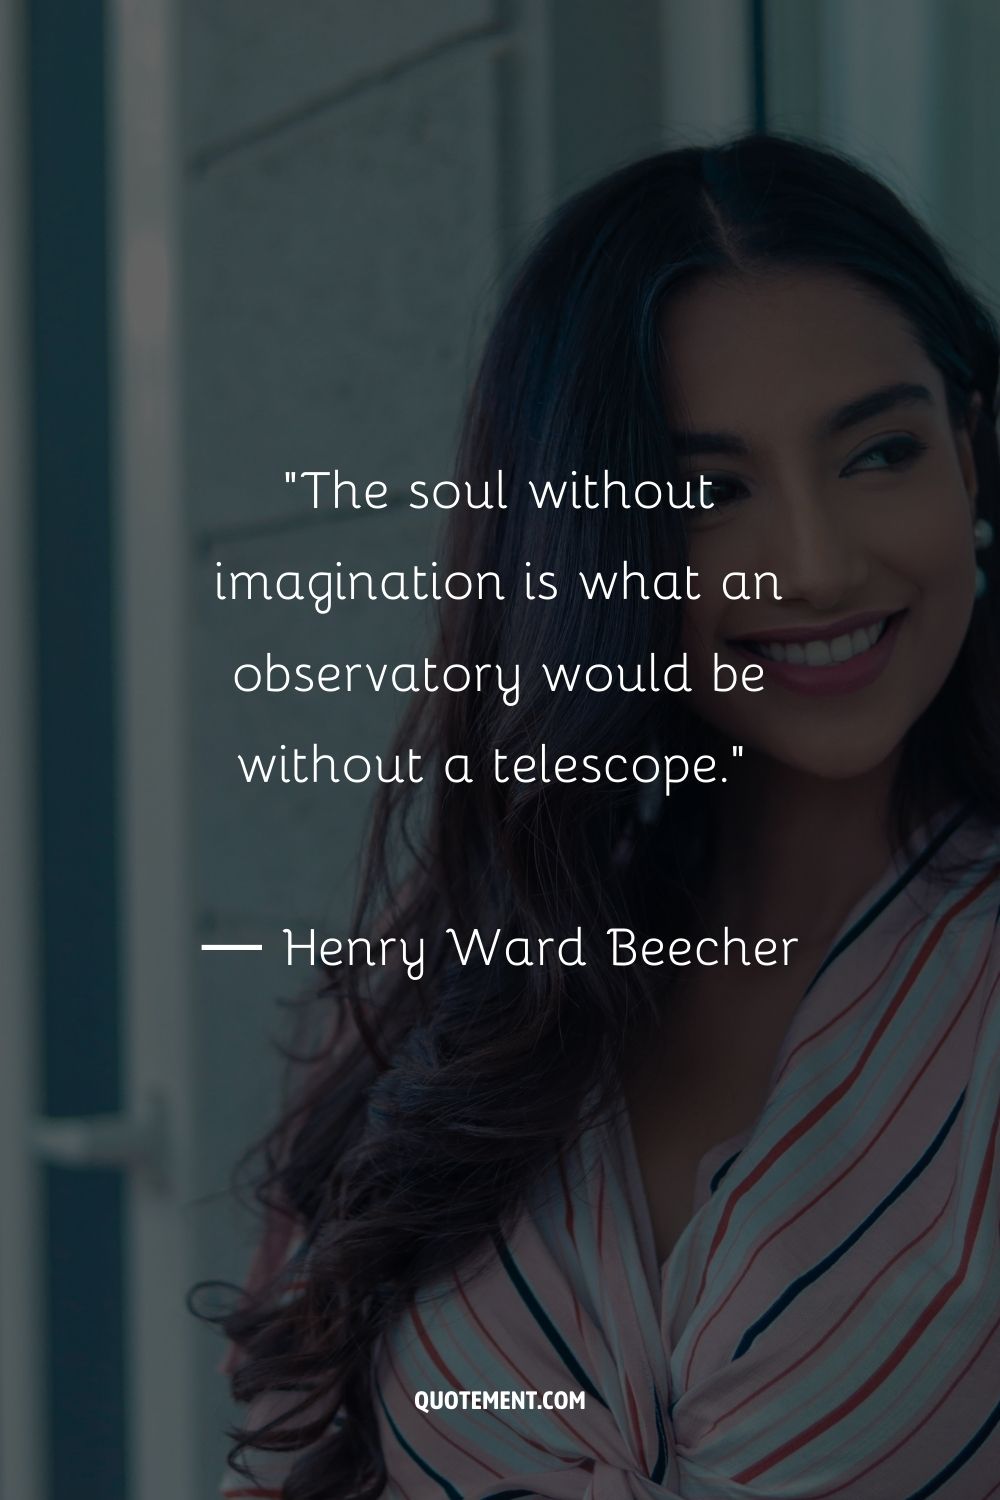 The soul without imagination is what an observatory would be without a telescope